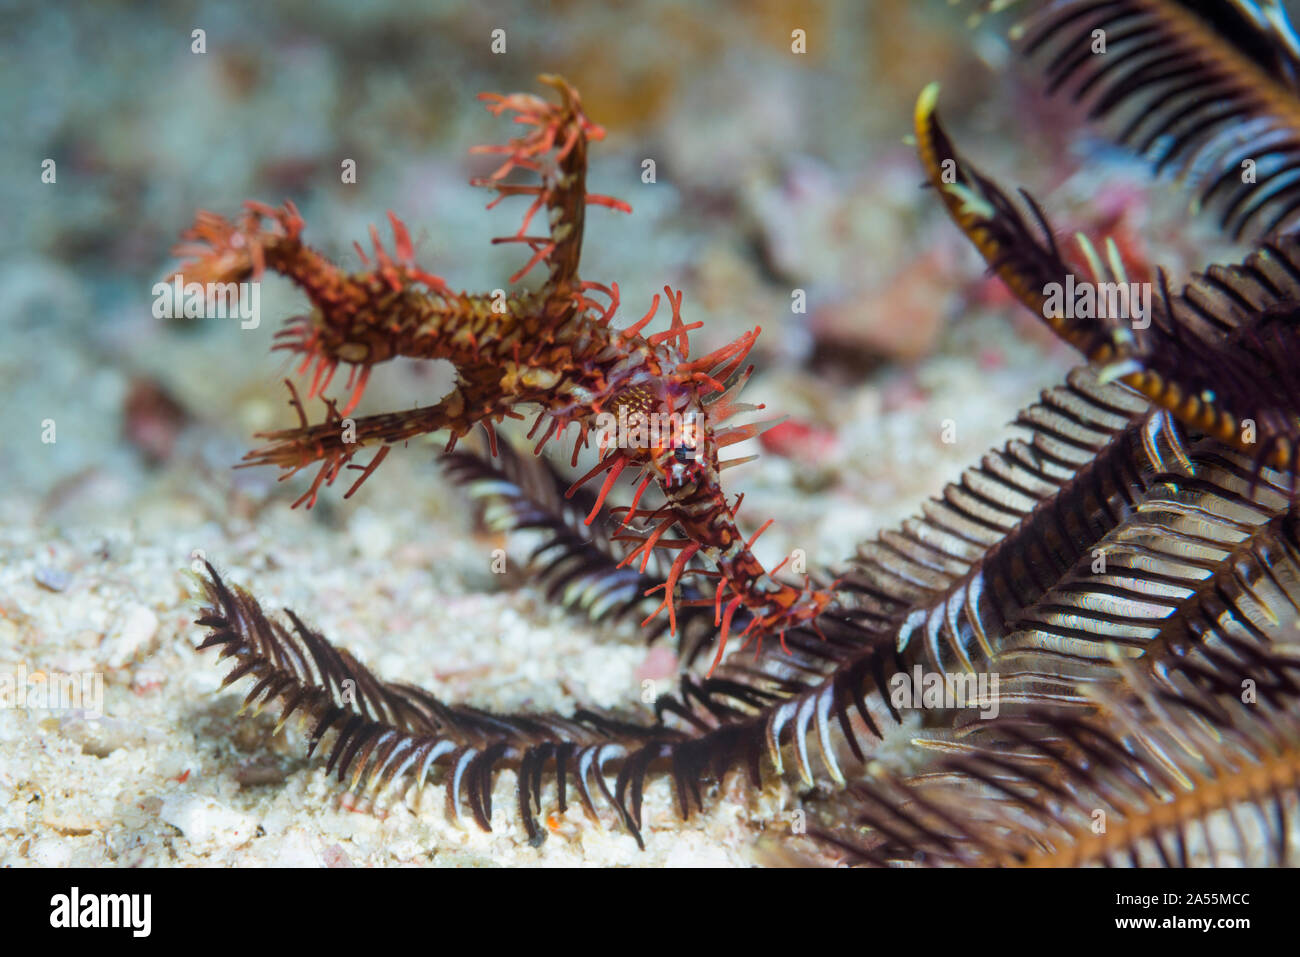 Ornate Ghost Pipefish [Solenostomus paradoxus] next to crinoid.  West Papua, Indonesia.  Indo-West Pacific. Stock Photo